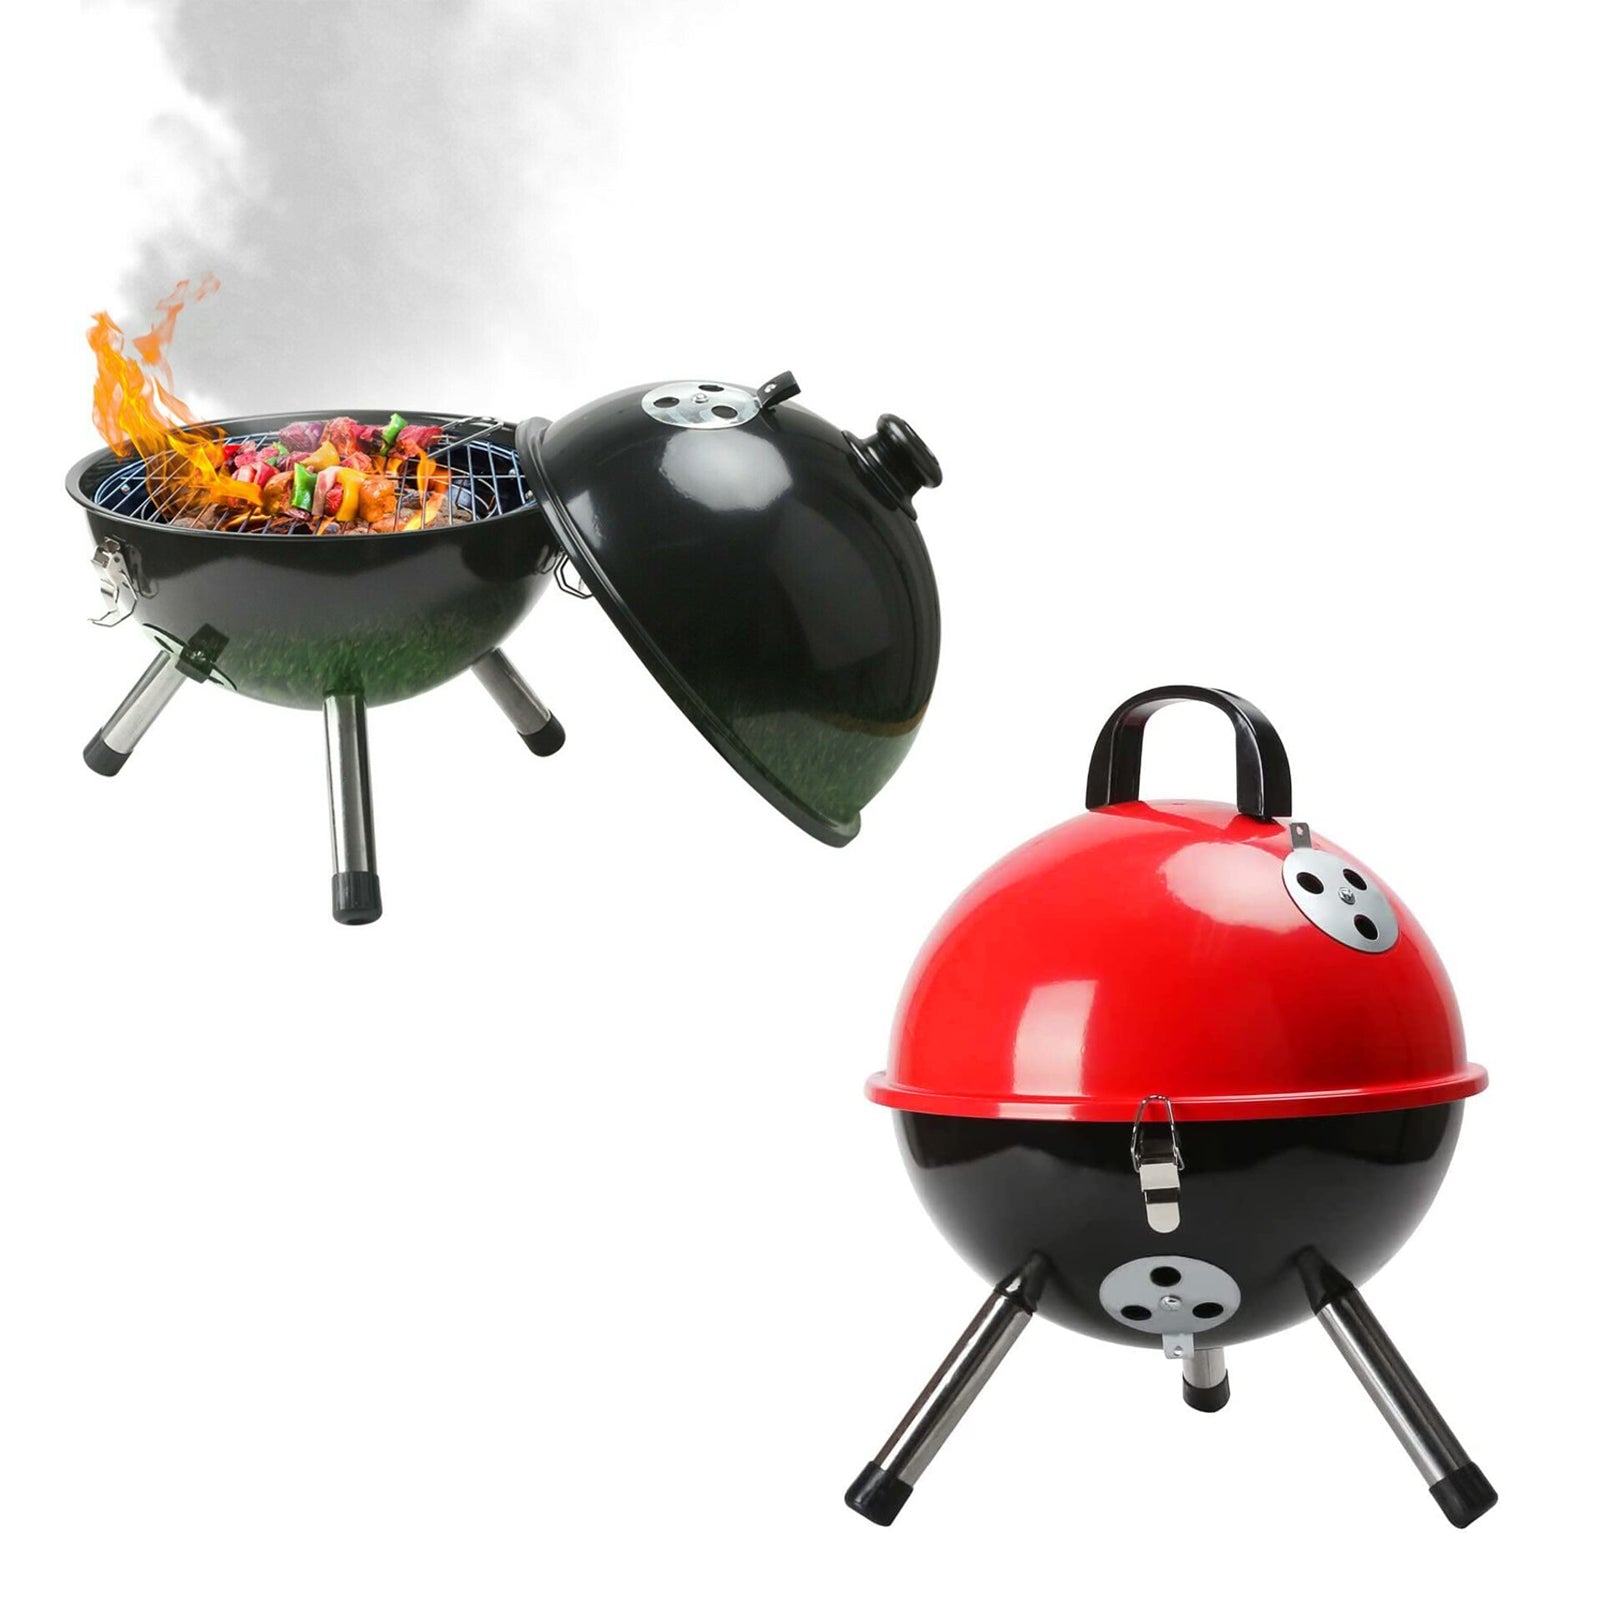 AMOS 12” Portable BBQ Charcoal Grill